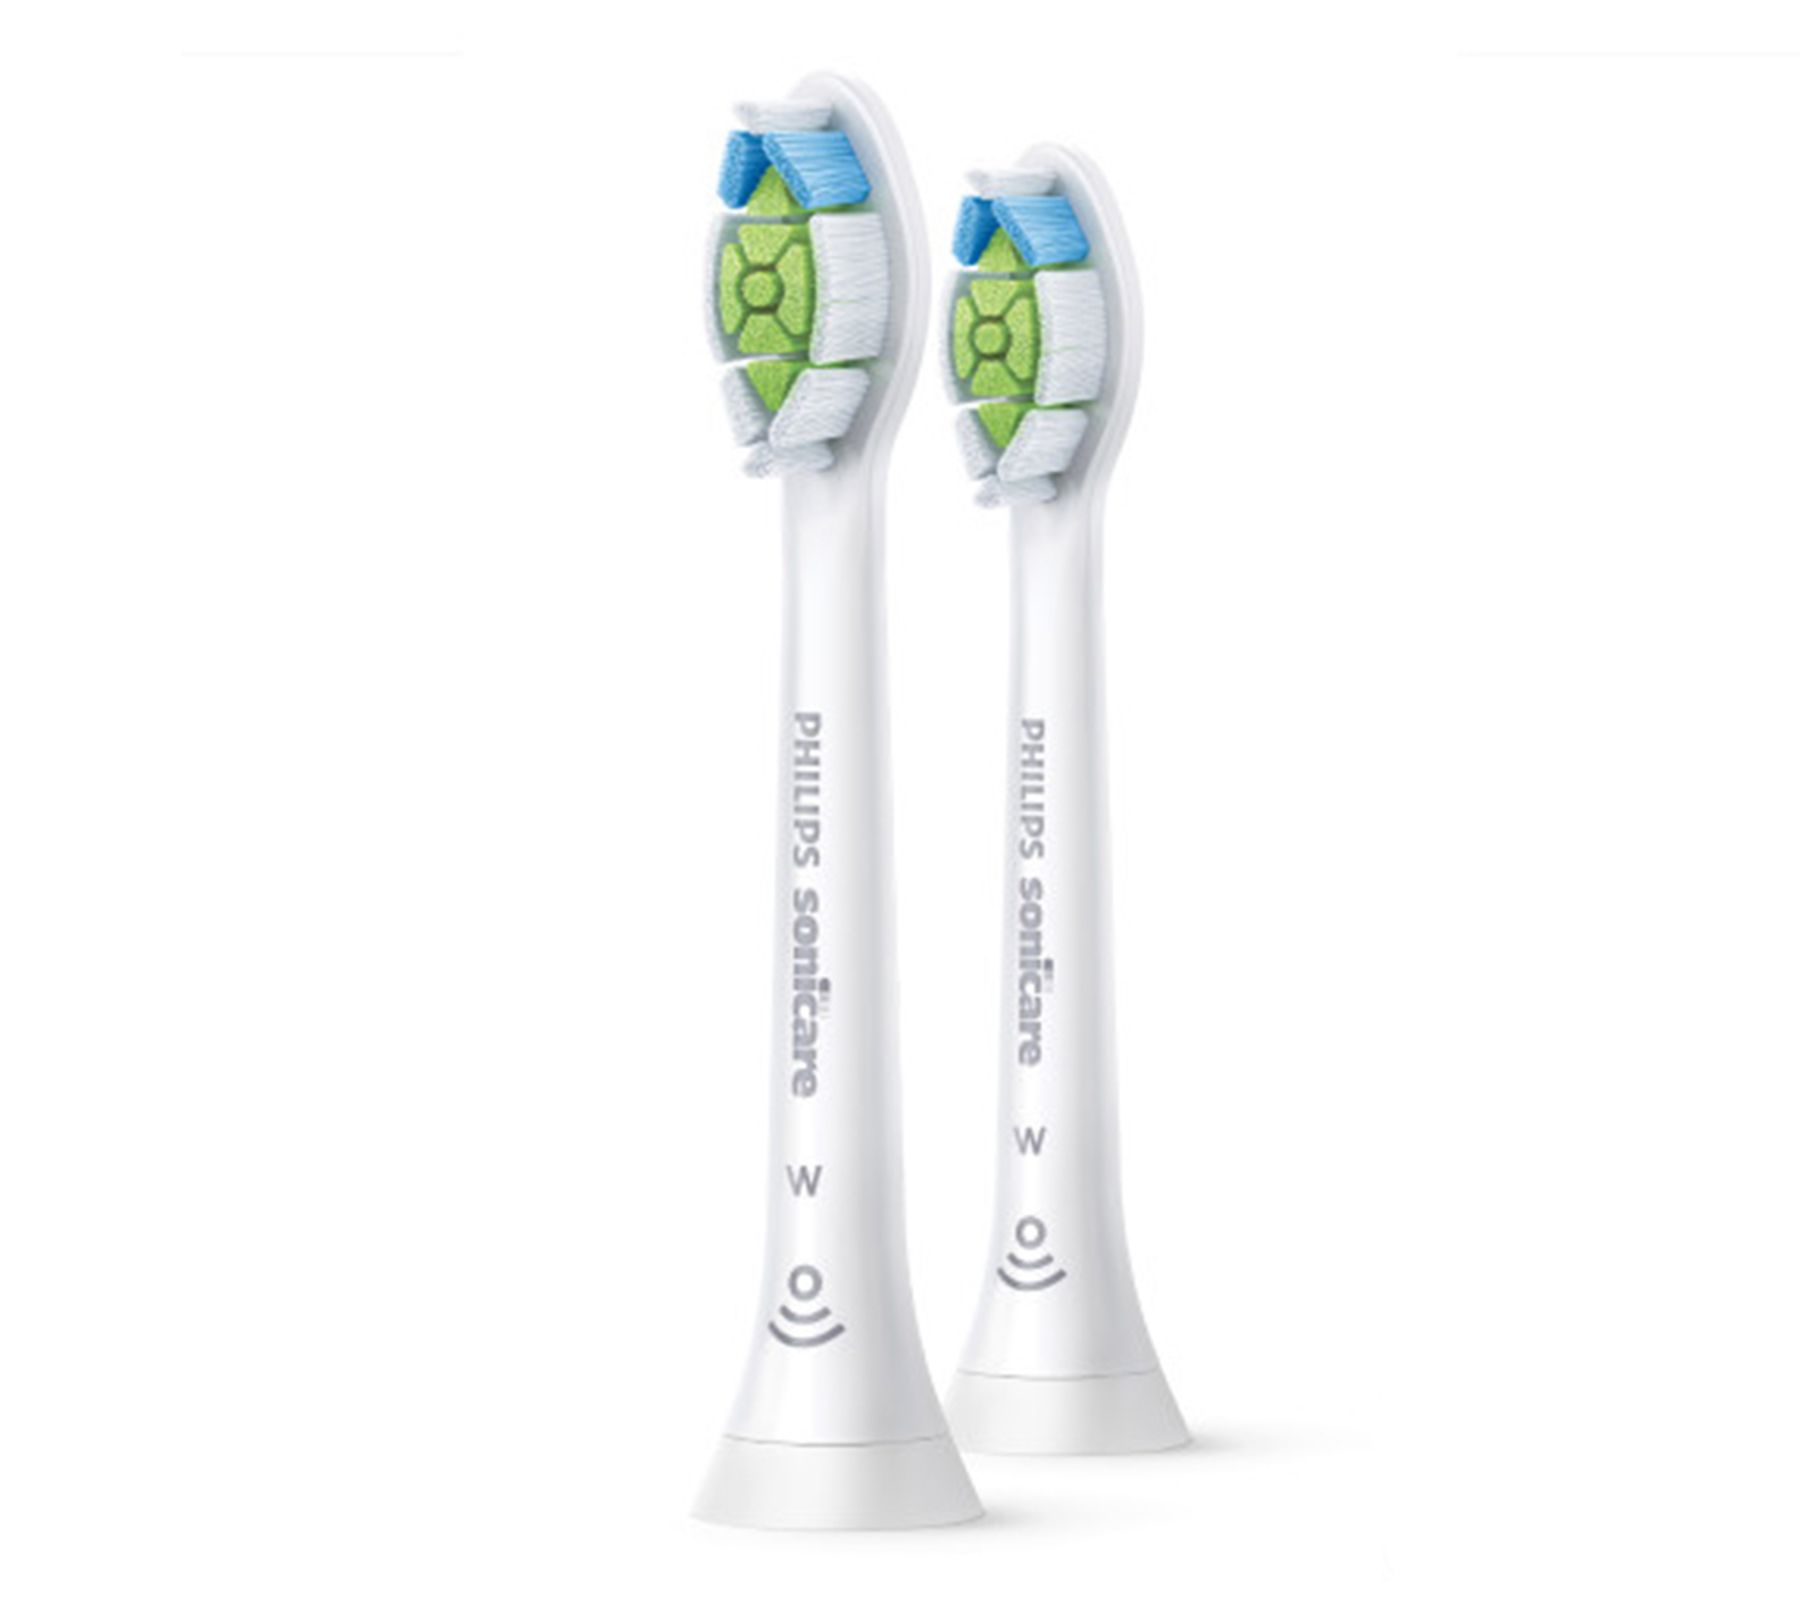 Philips Sonicare Return Policy